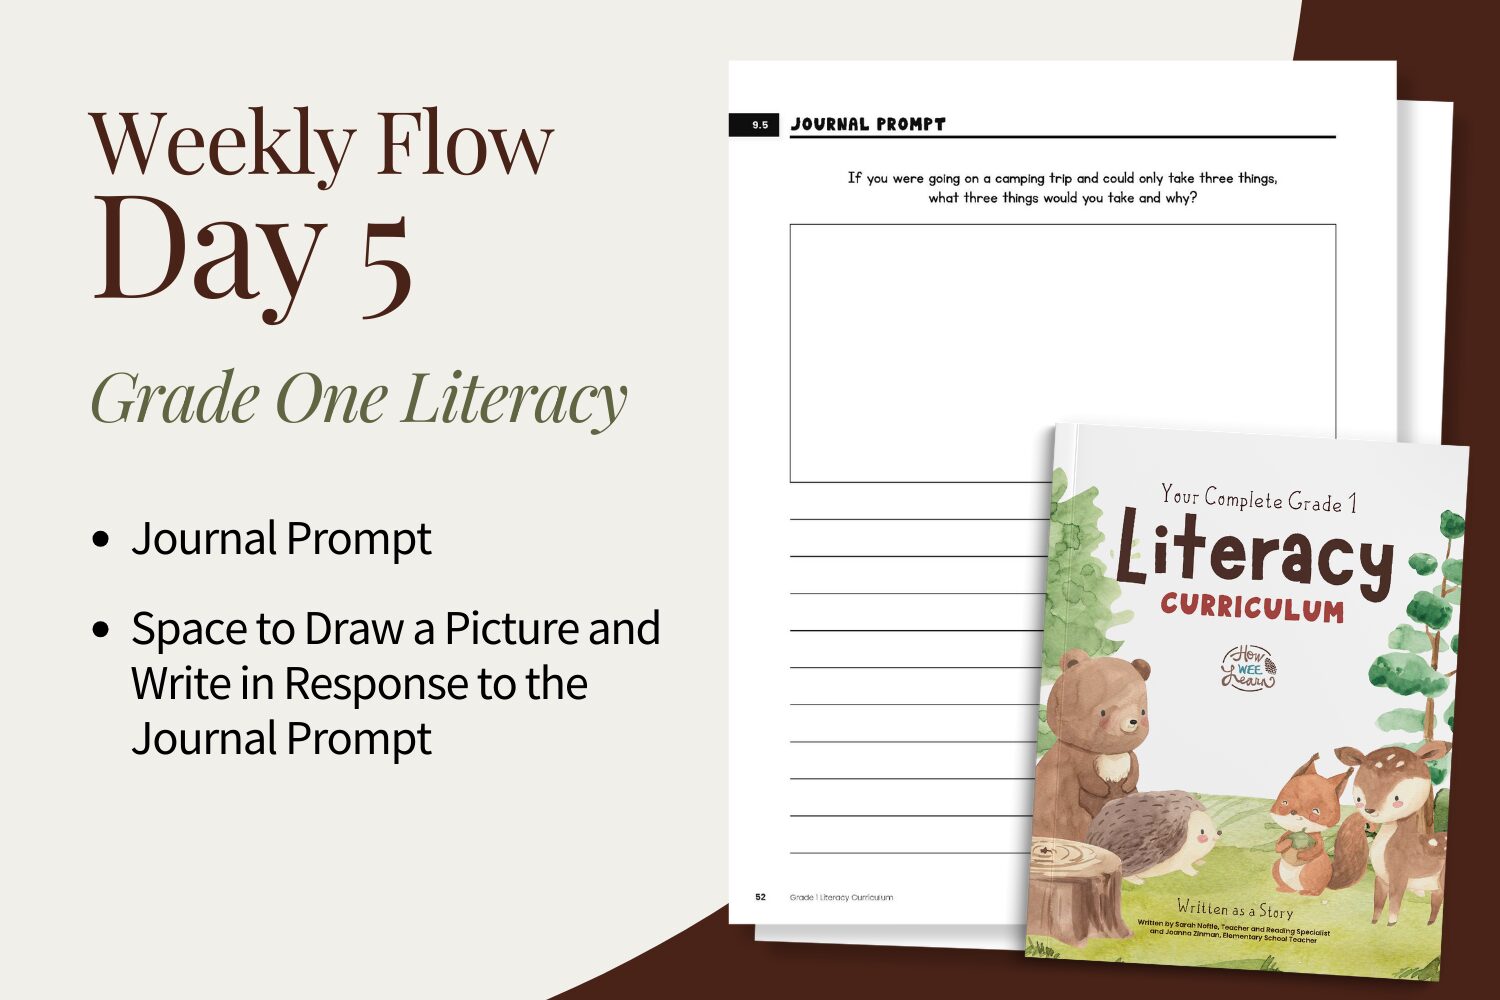 Grade One Literacy: Weekly Flow, Day 5 - Journal Prompt - Space to Draw a Picture and Write in Response to the Journal Prompt